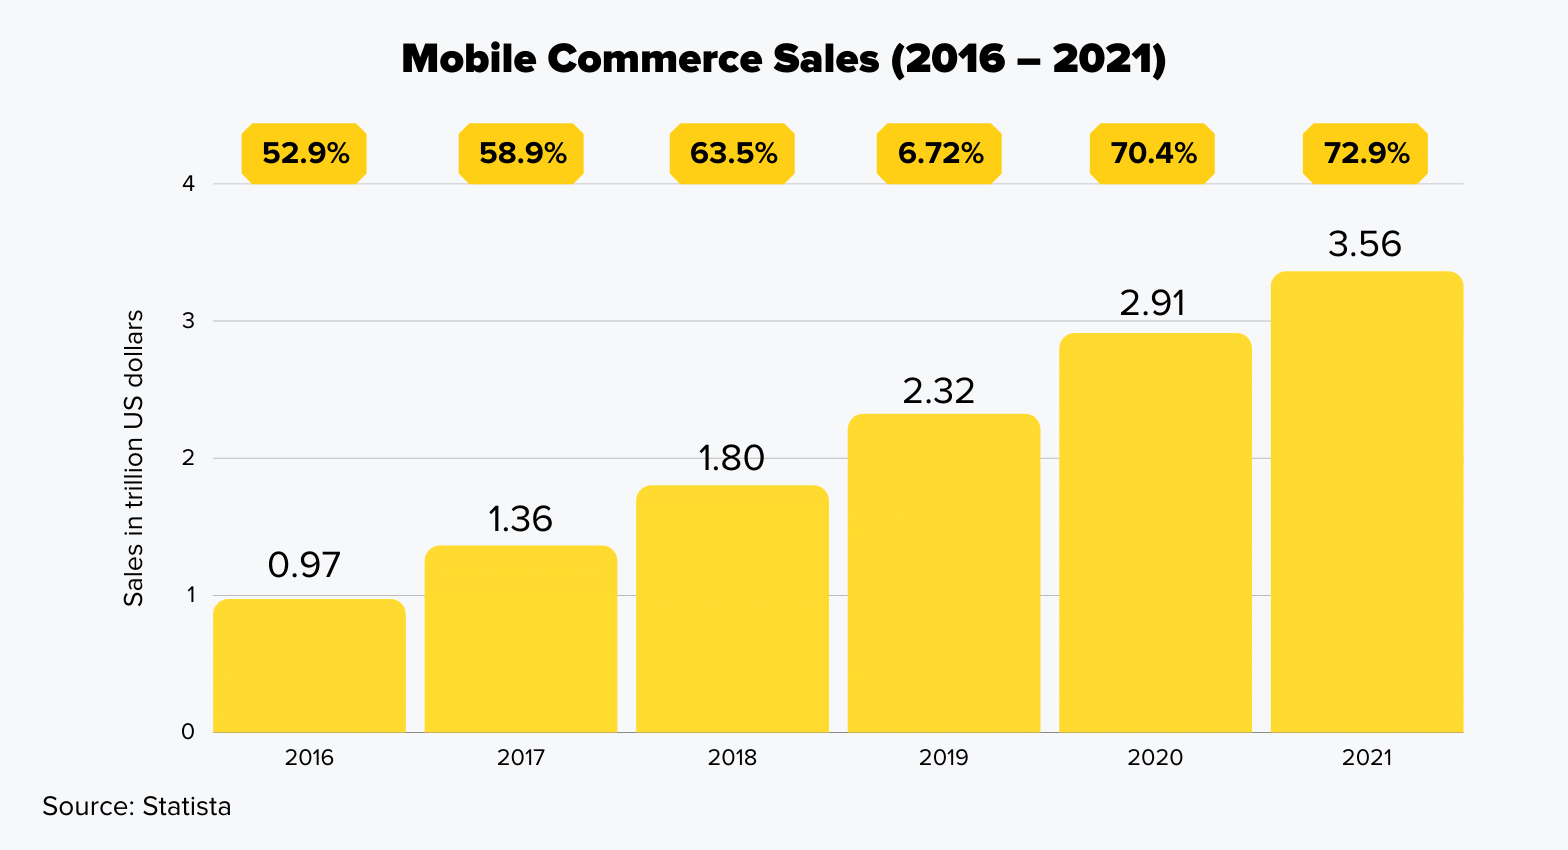 Mobile Commerce Sales 2026 to 2021